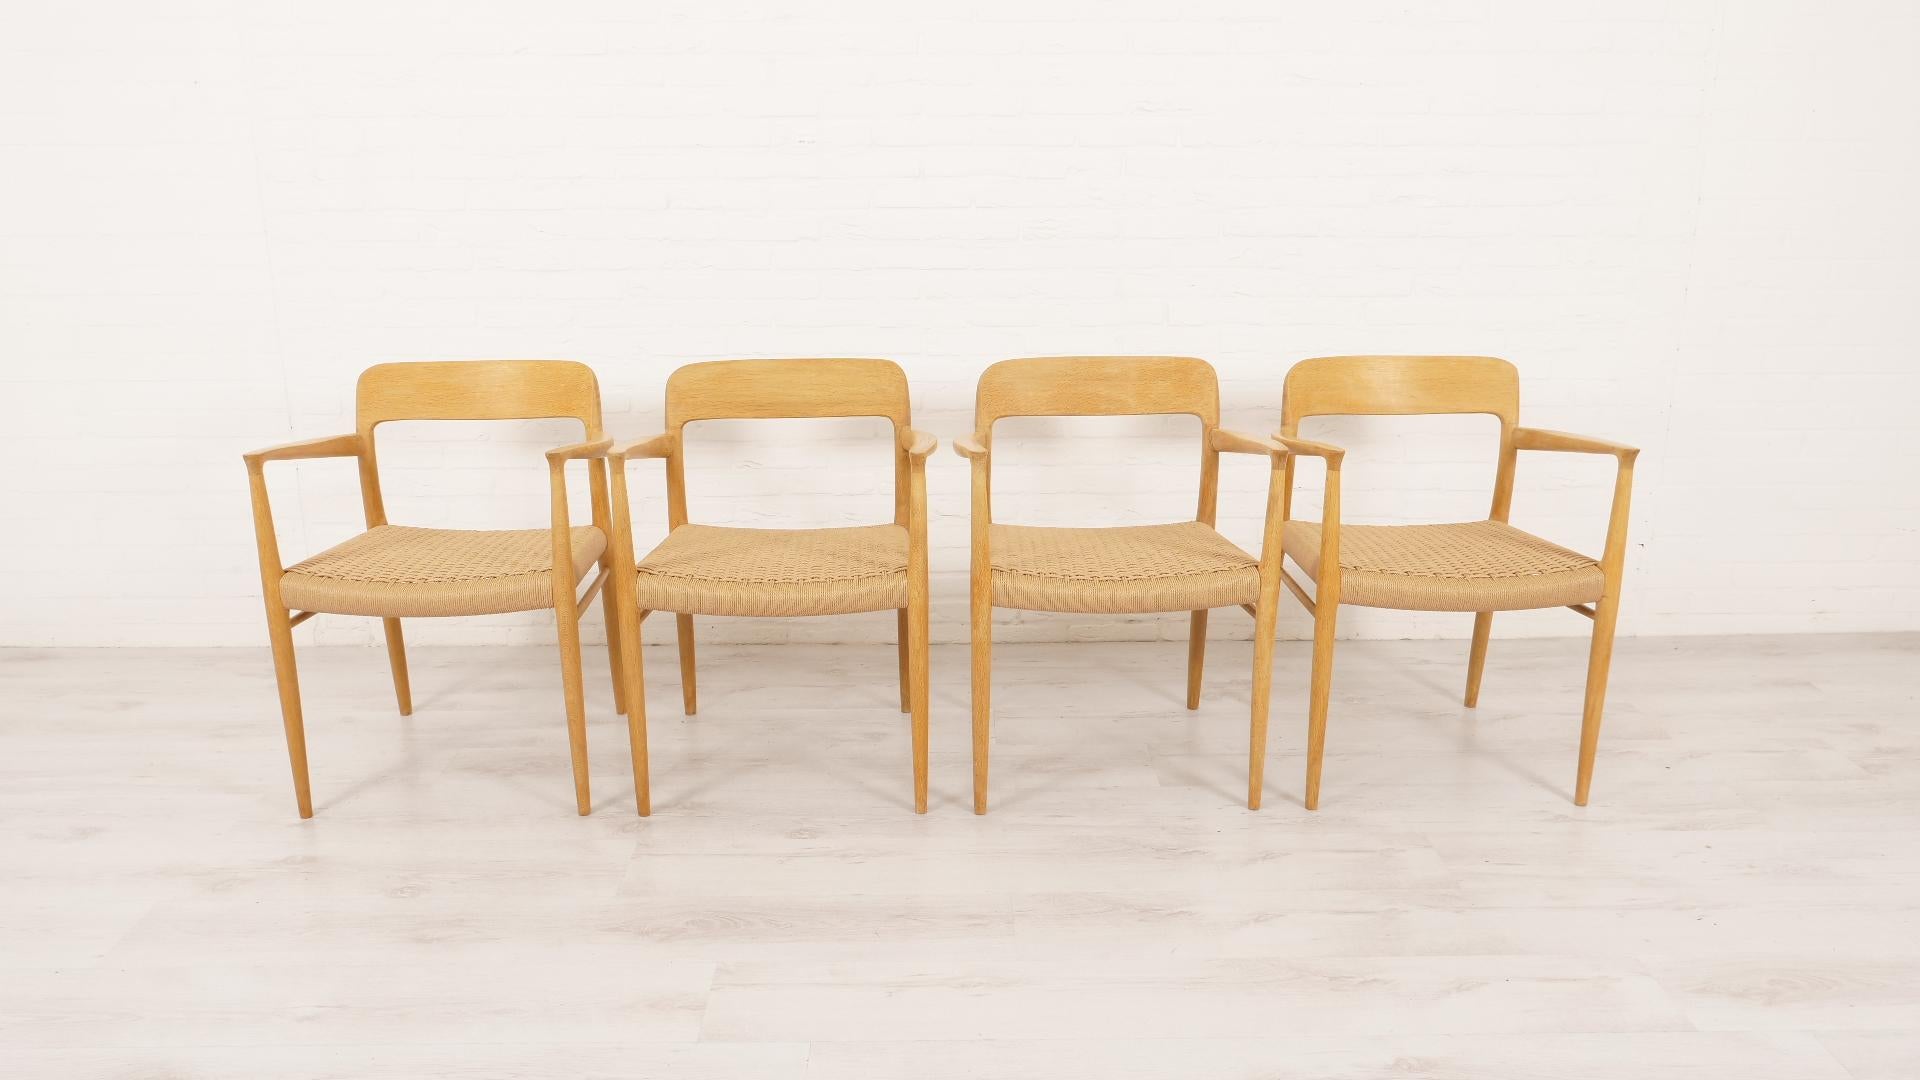 Set of 4 beautiful vintage dining chairs. These chairs were designed by Niels Otto Møller, model 56. The chairs are finished in oak and fitted with new Danish Papercord. The frames of the chairs have been refinished with Danish soap.

Design period: